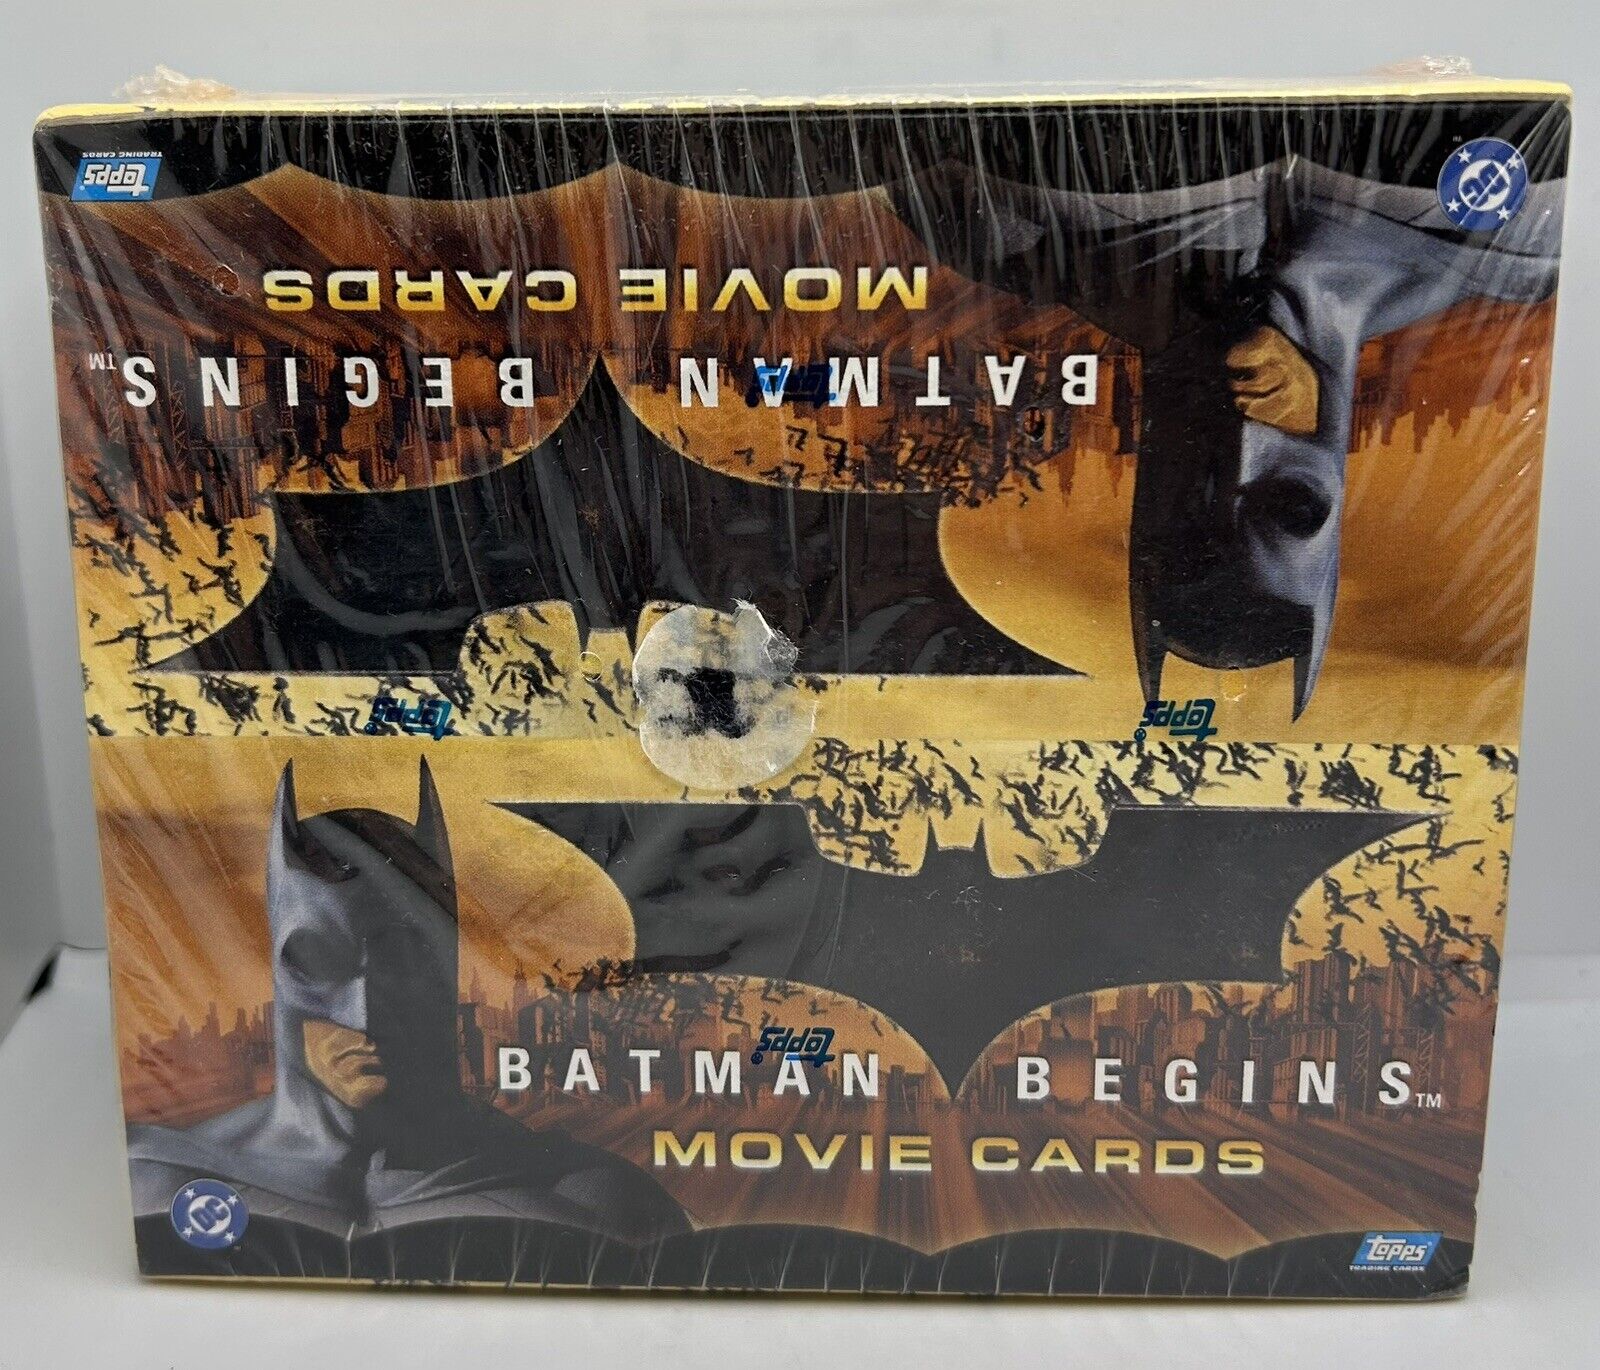 2005 Topps Batman Begins Movie Cards Factory Sealed Box - 24 Packs/7 cards per